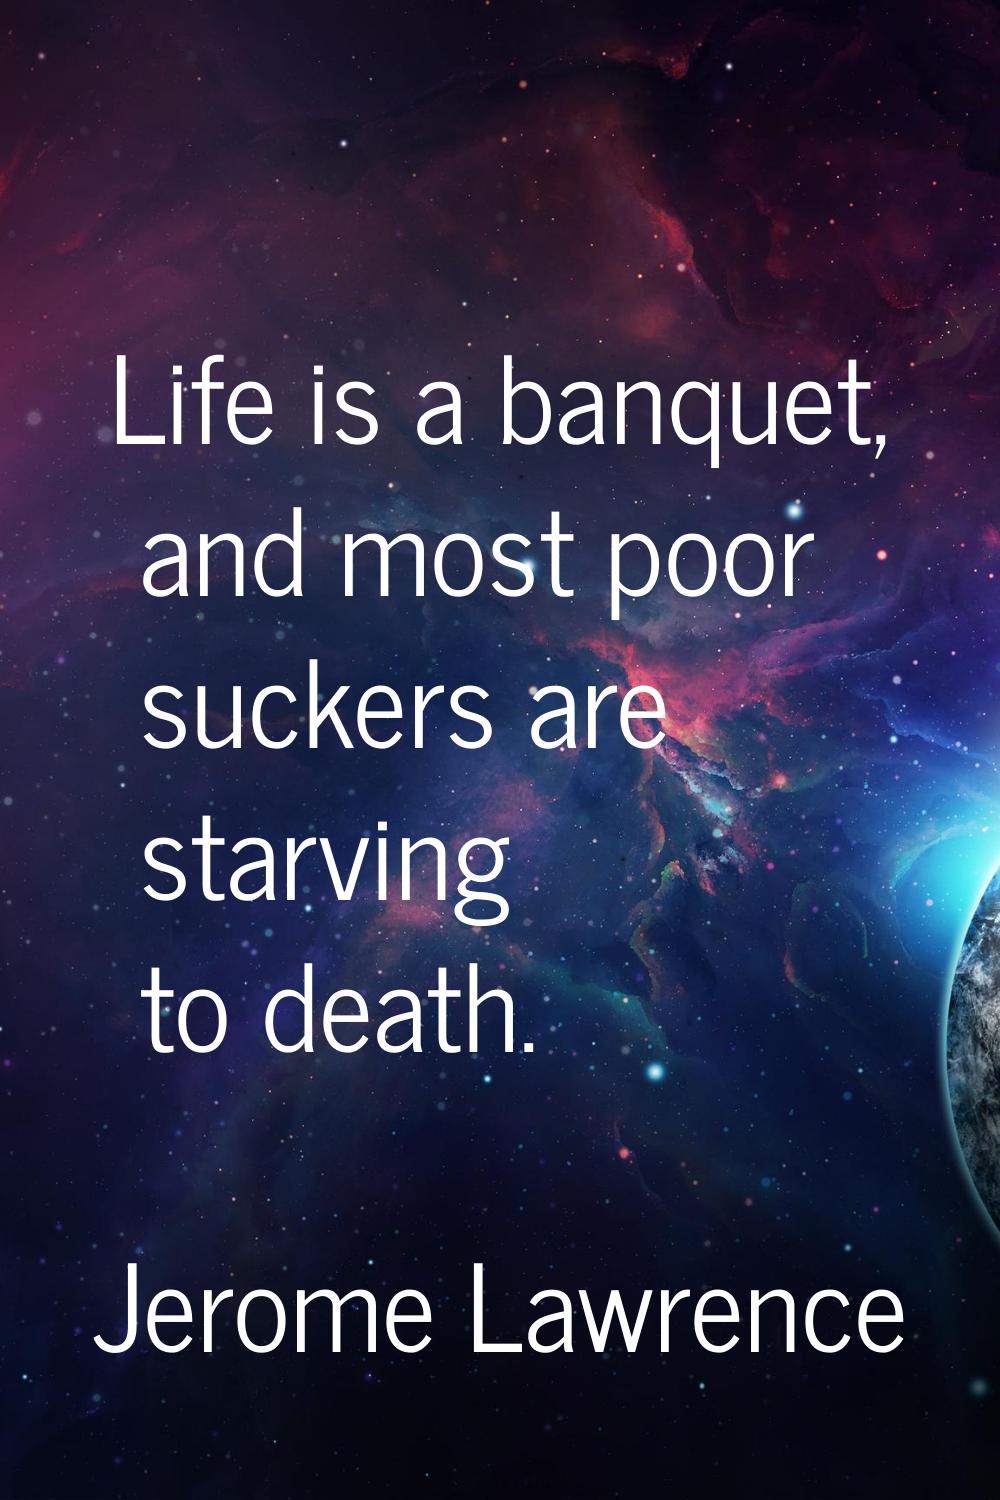 Life is a banquet, and most poor suckers are starving to death.